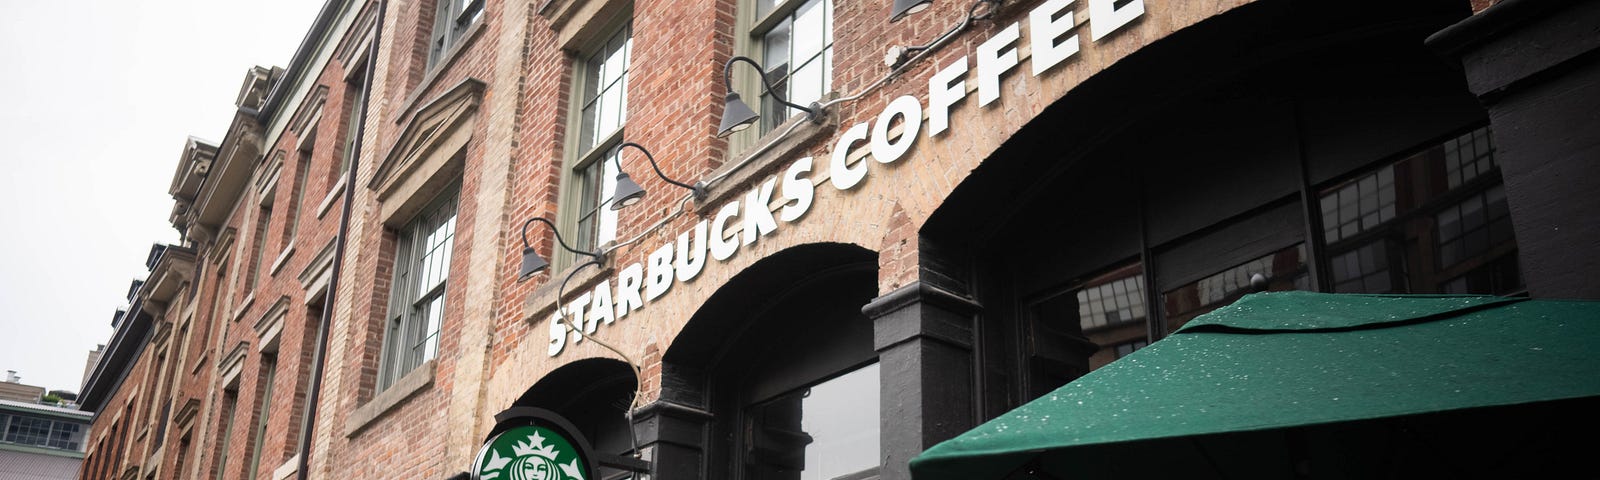 image shows the outside of a Starbucks within a brick building